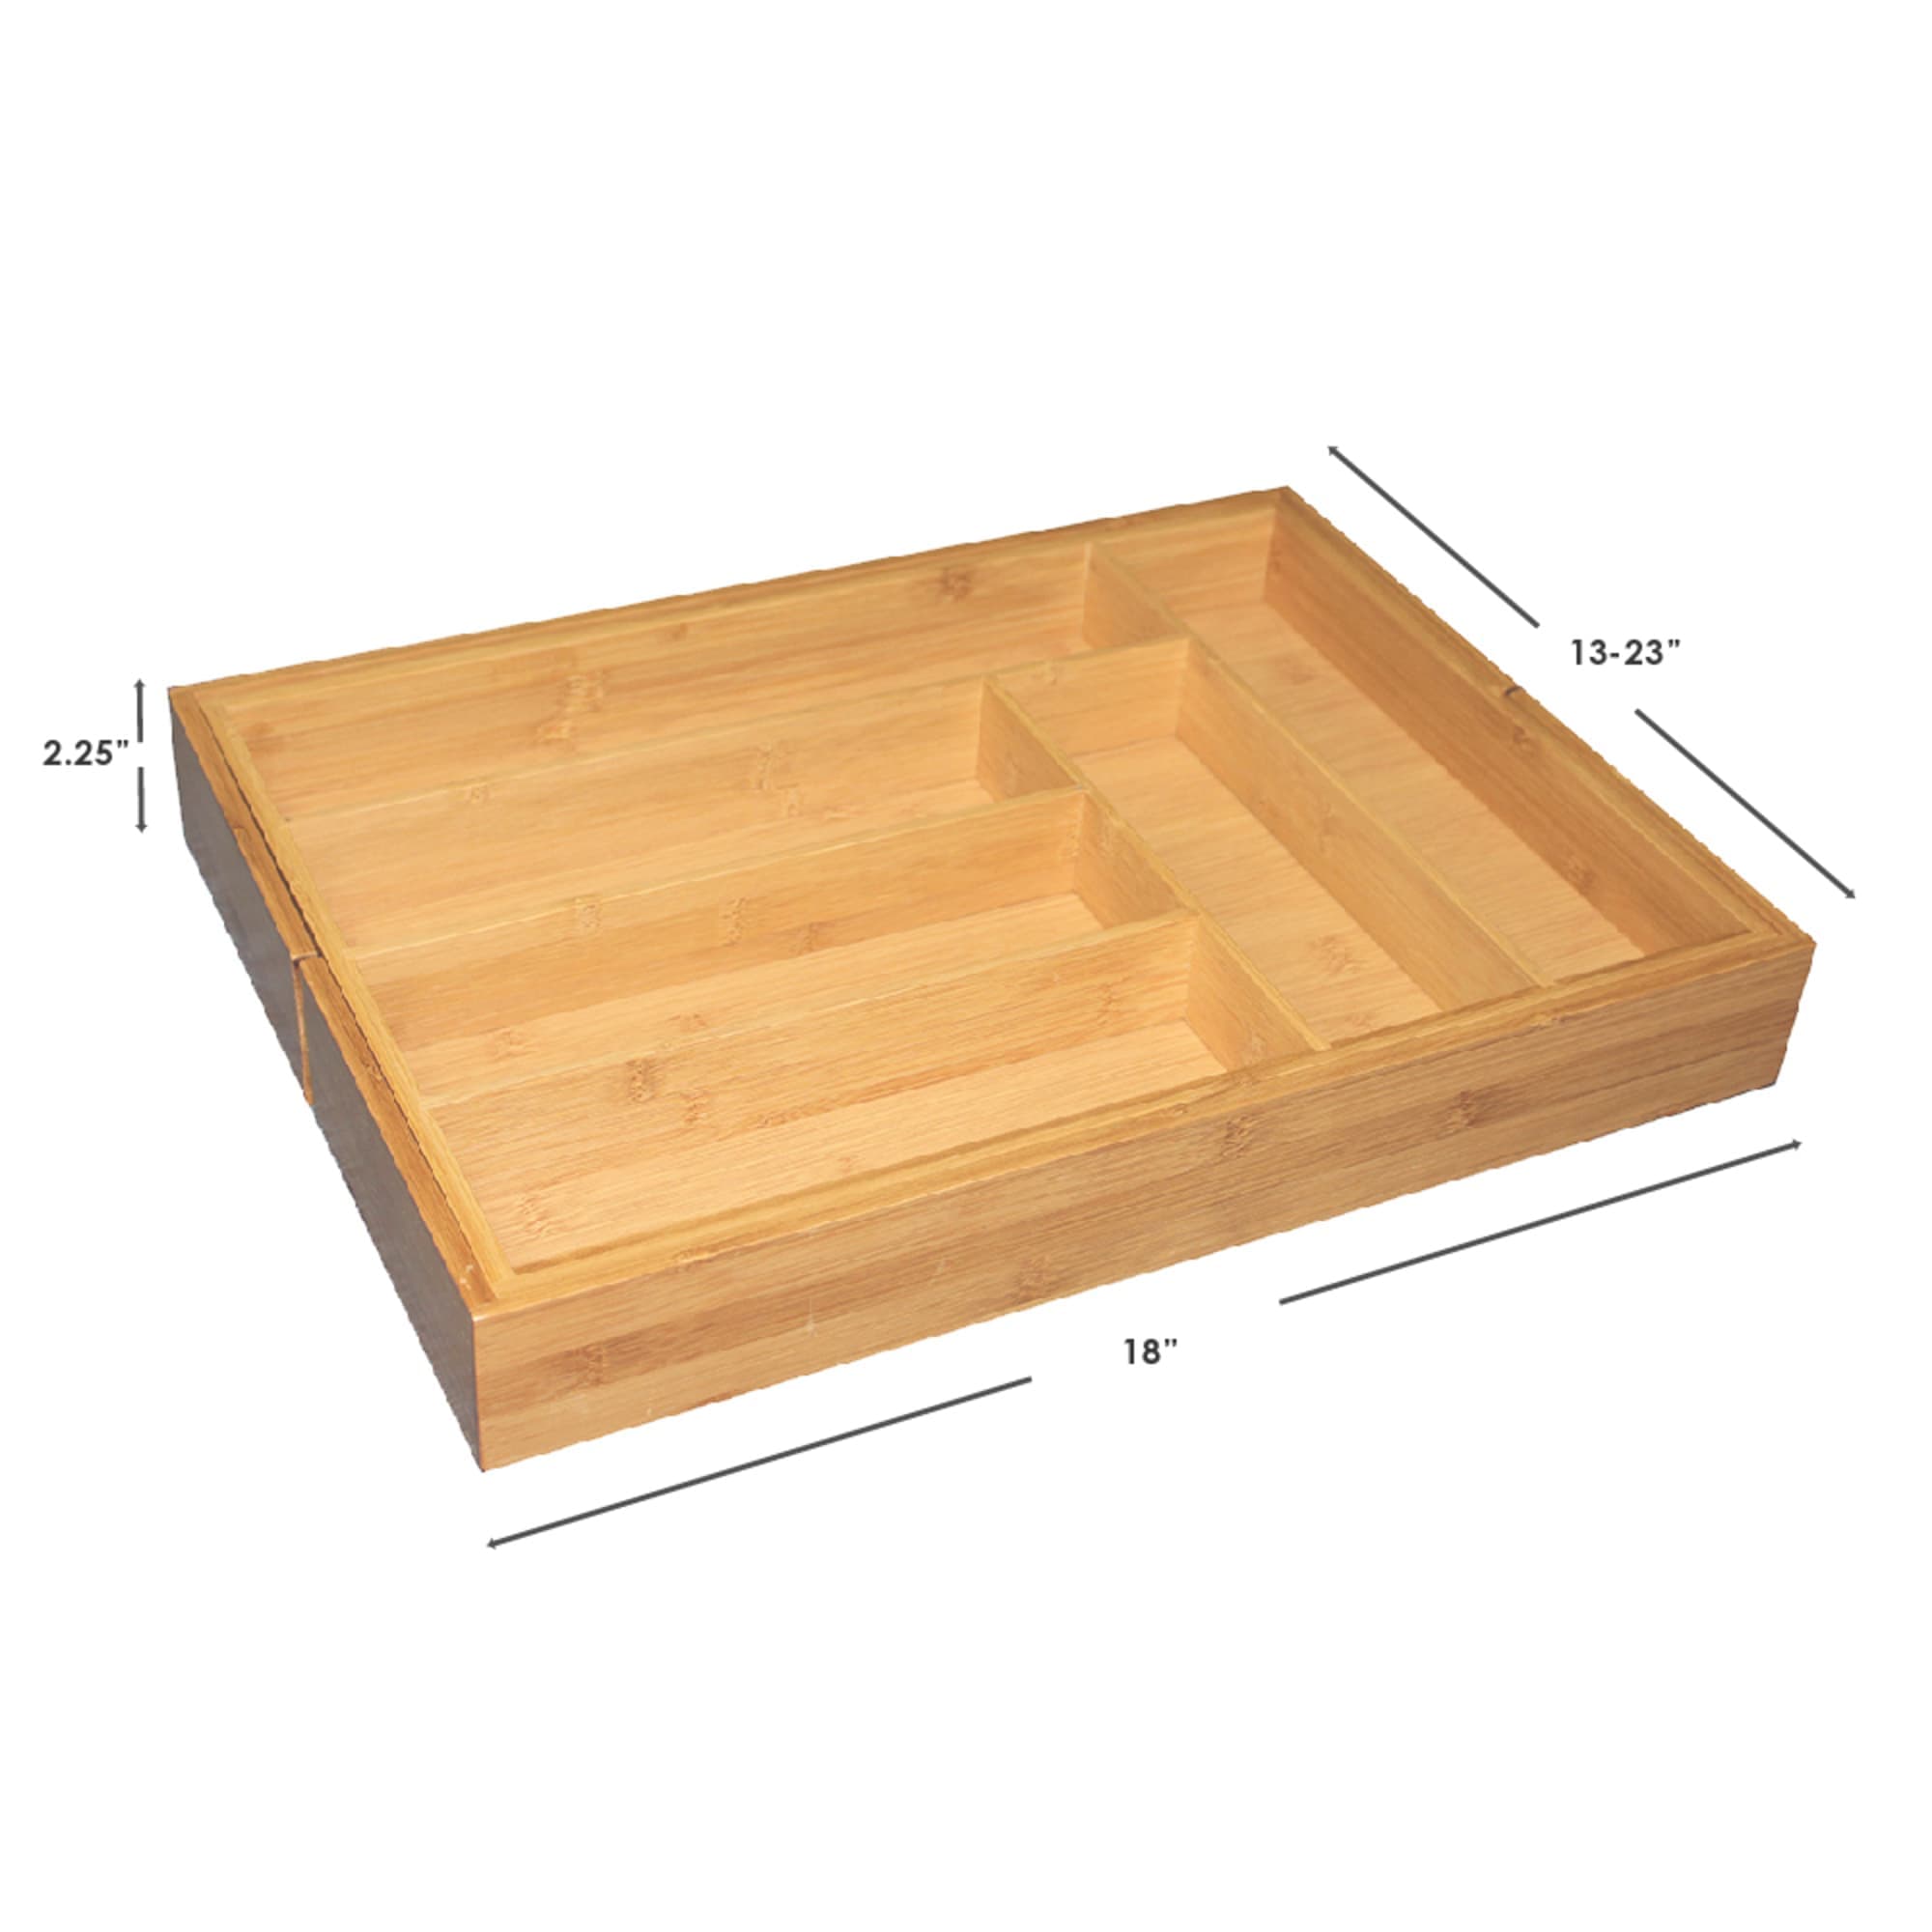 Home Basics Expandable 8 Compartment Bamboo Cutlery Tray, Natural $15.00 EACH, CASE PACK OF 6